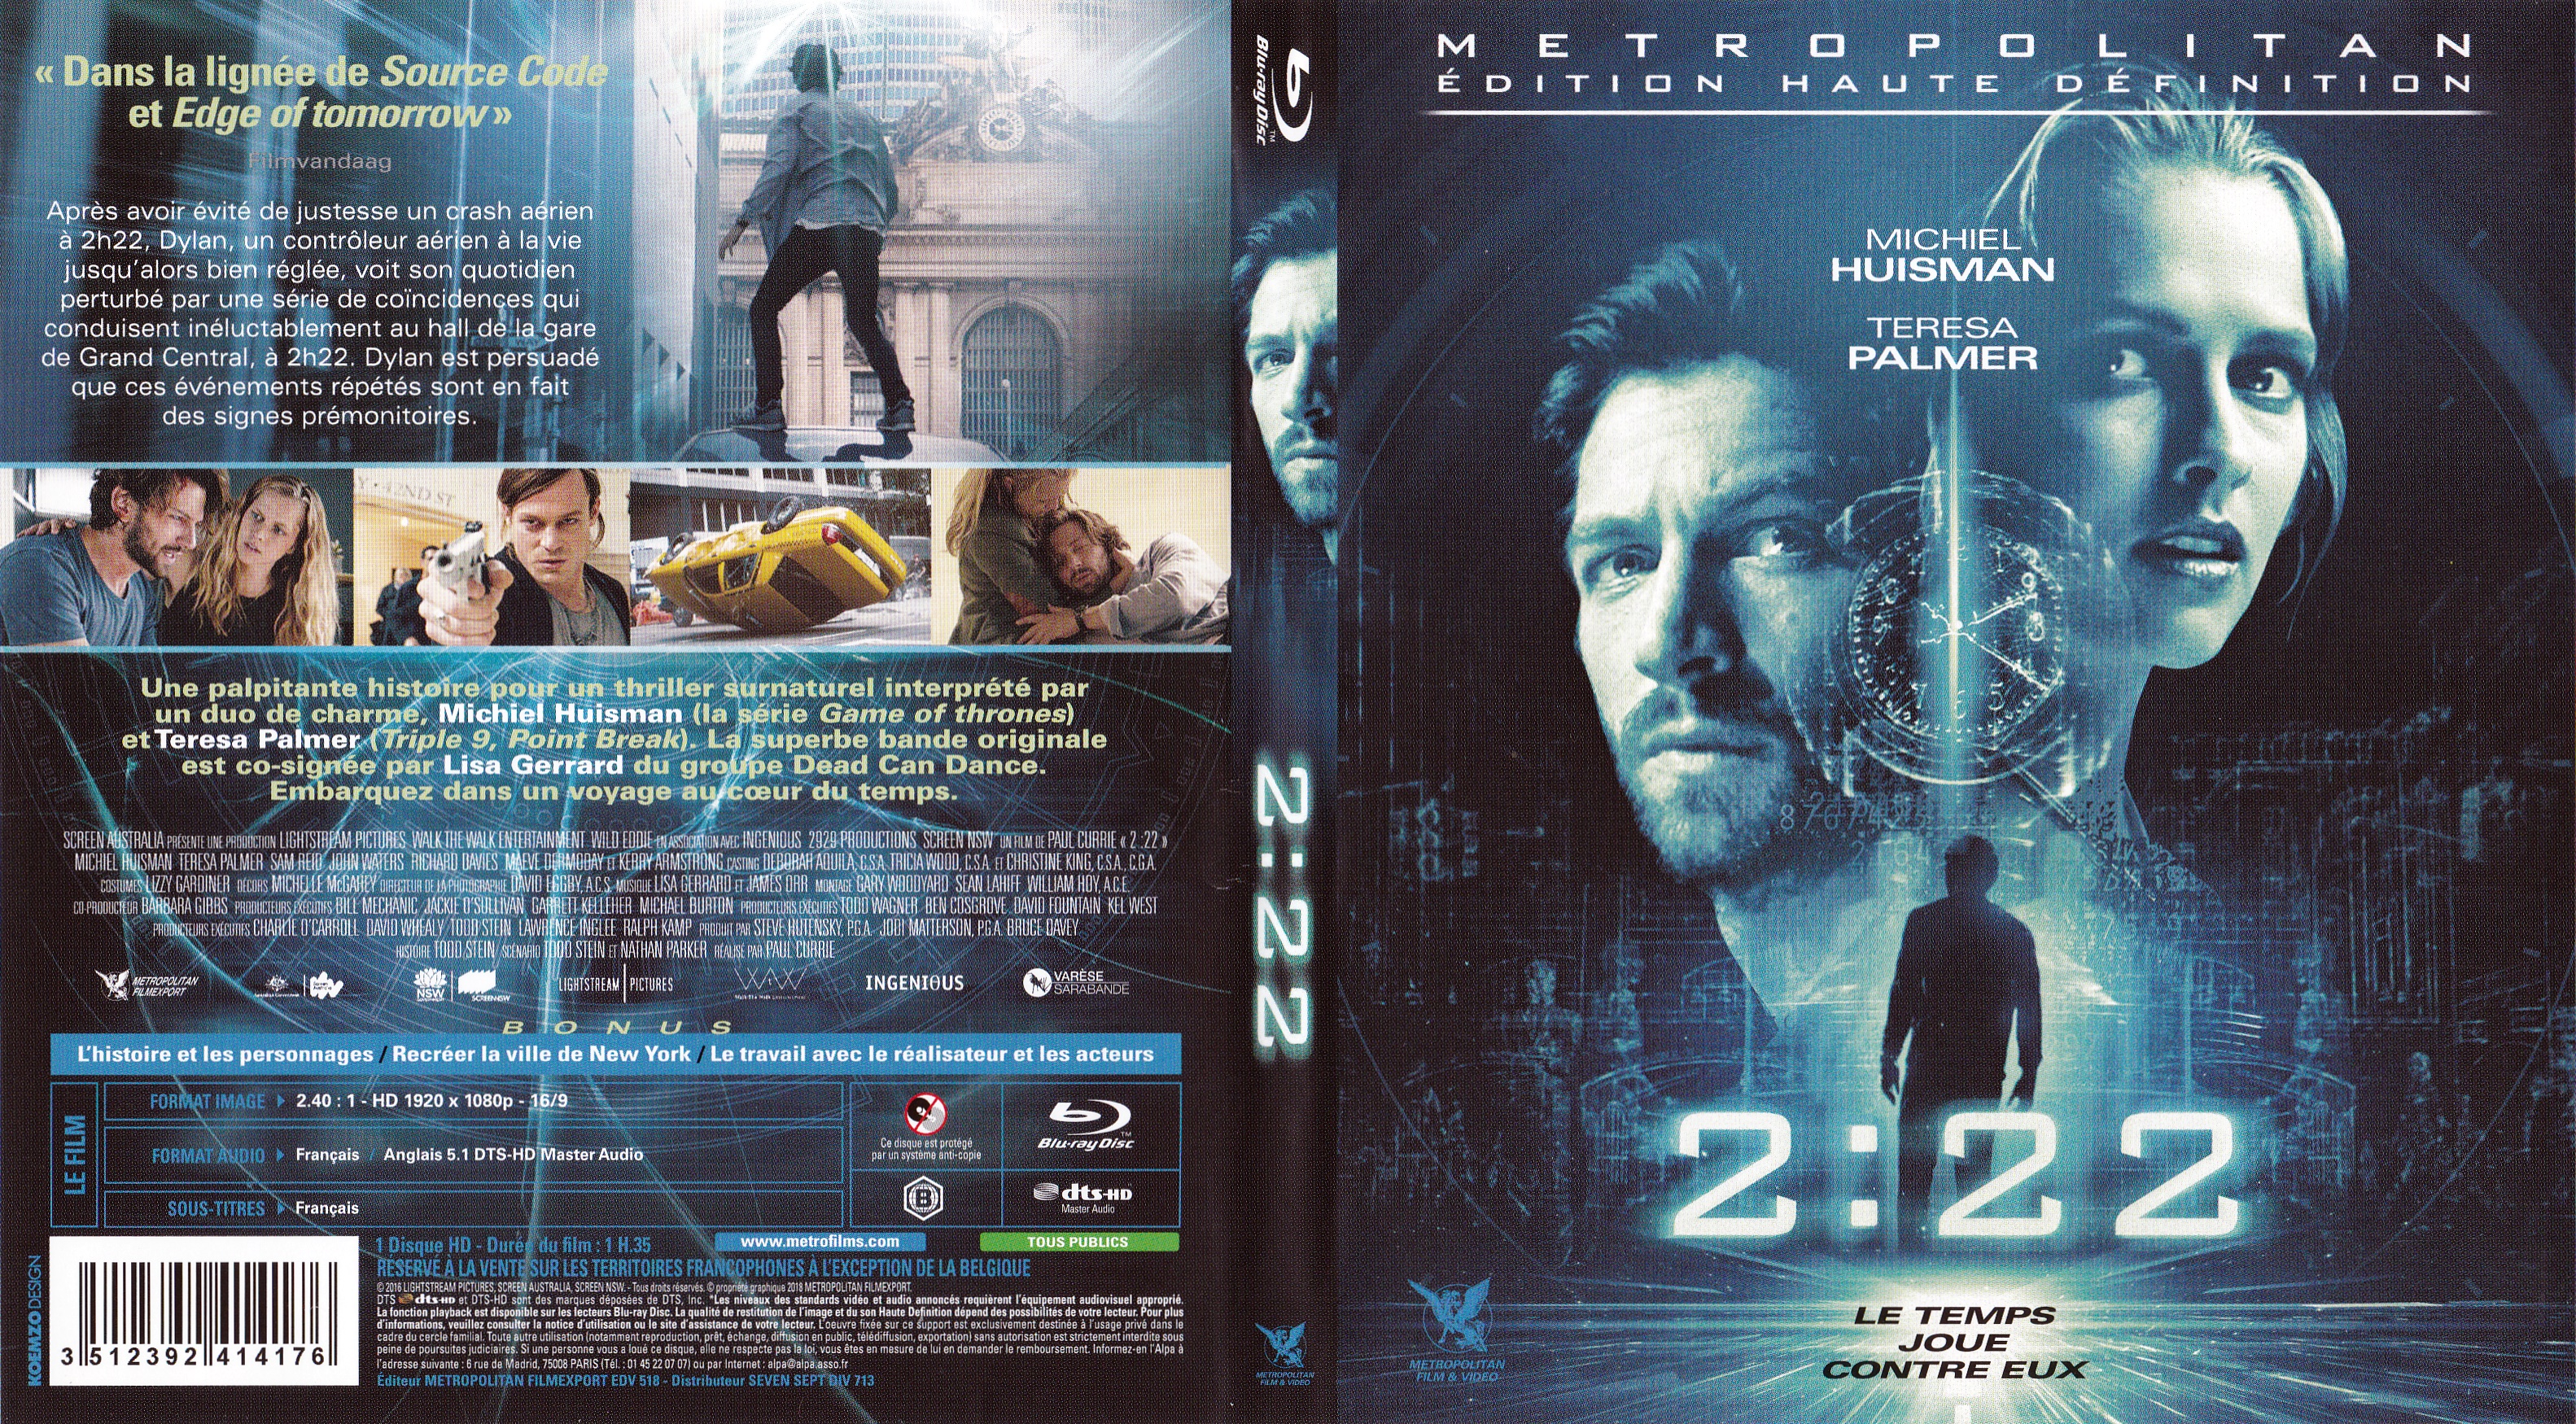 Jaquette DVD 2:22 (BLU-RAY)